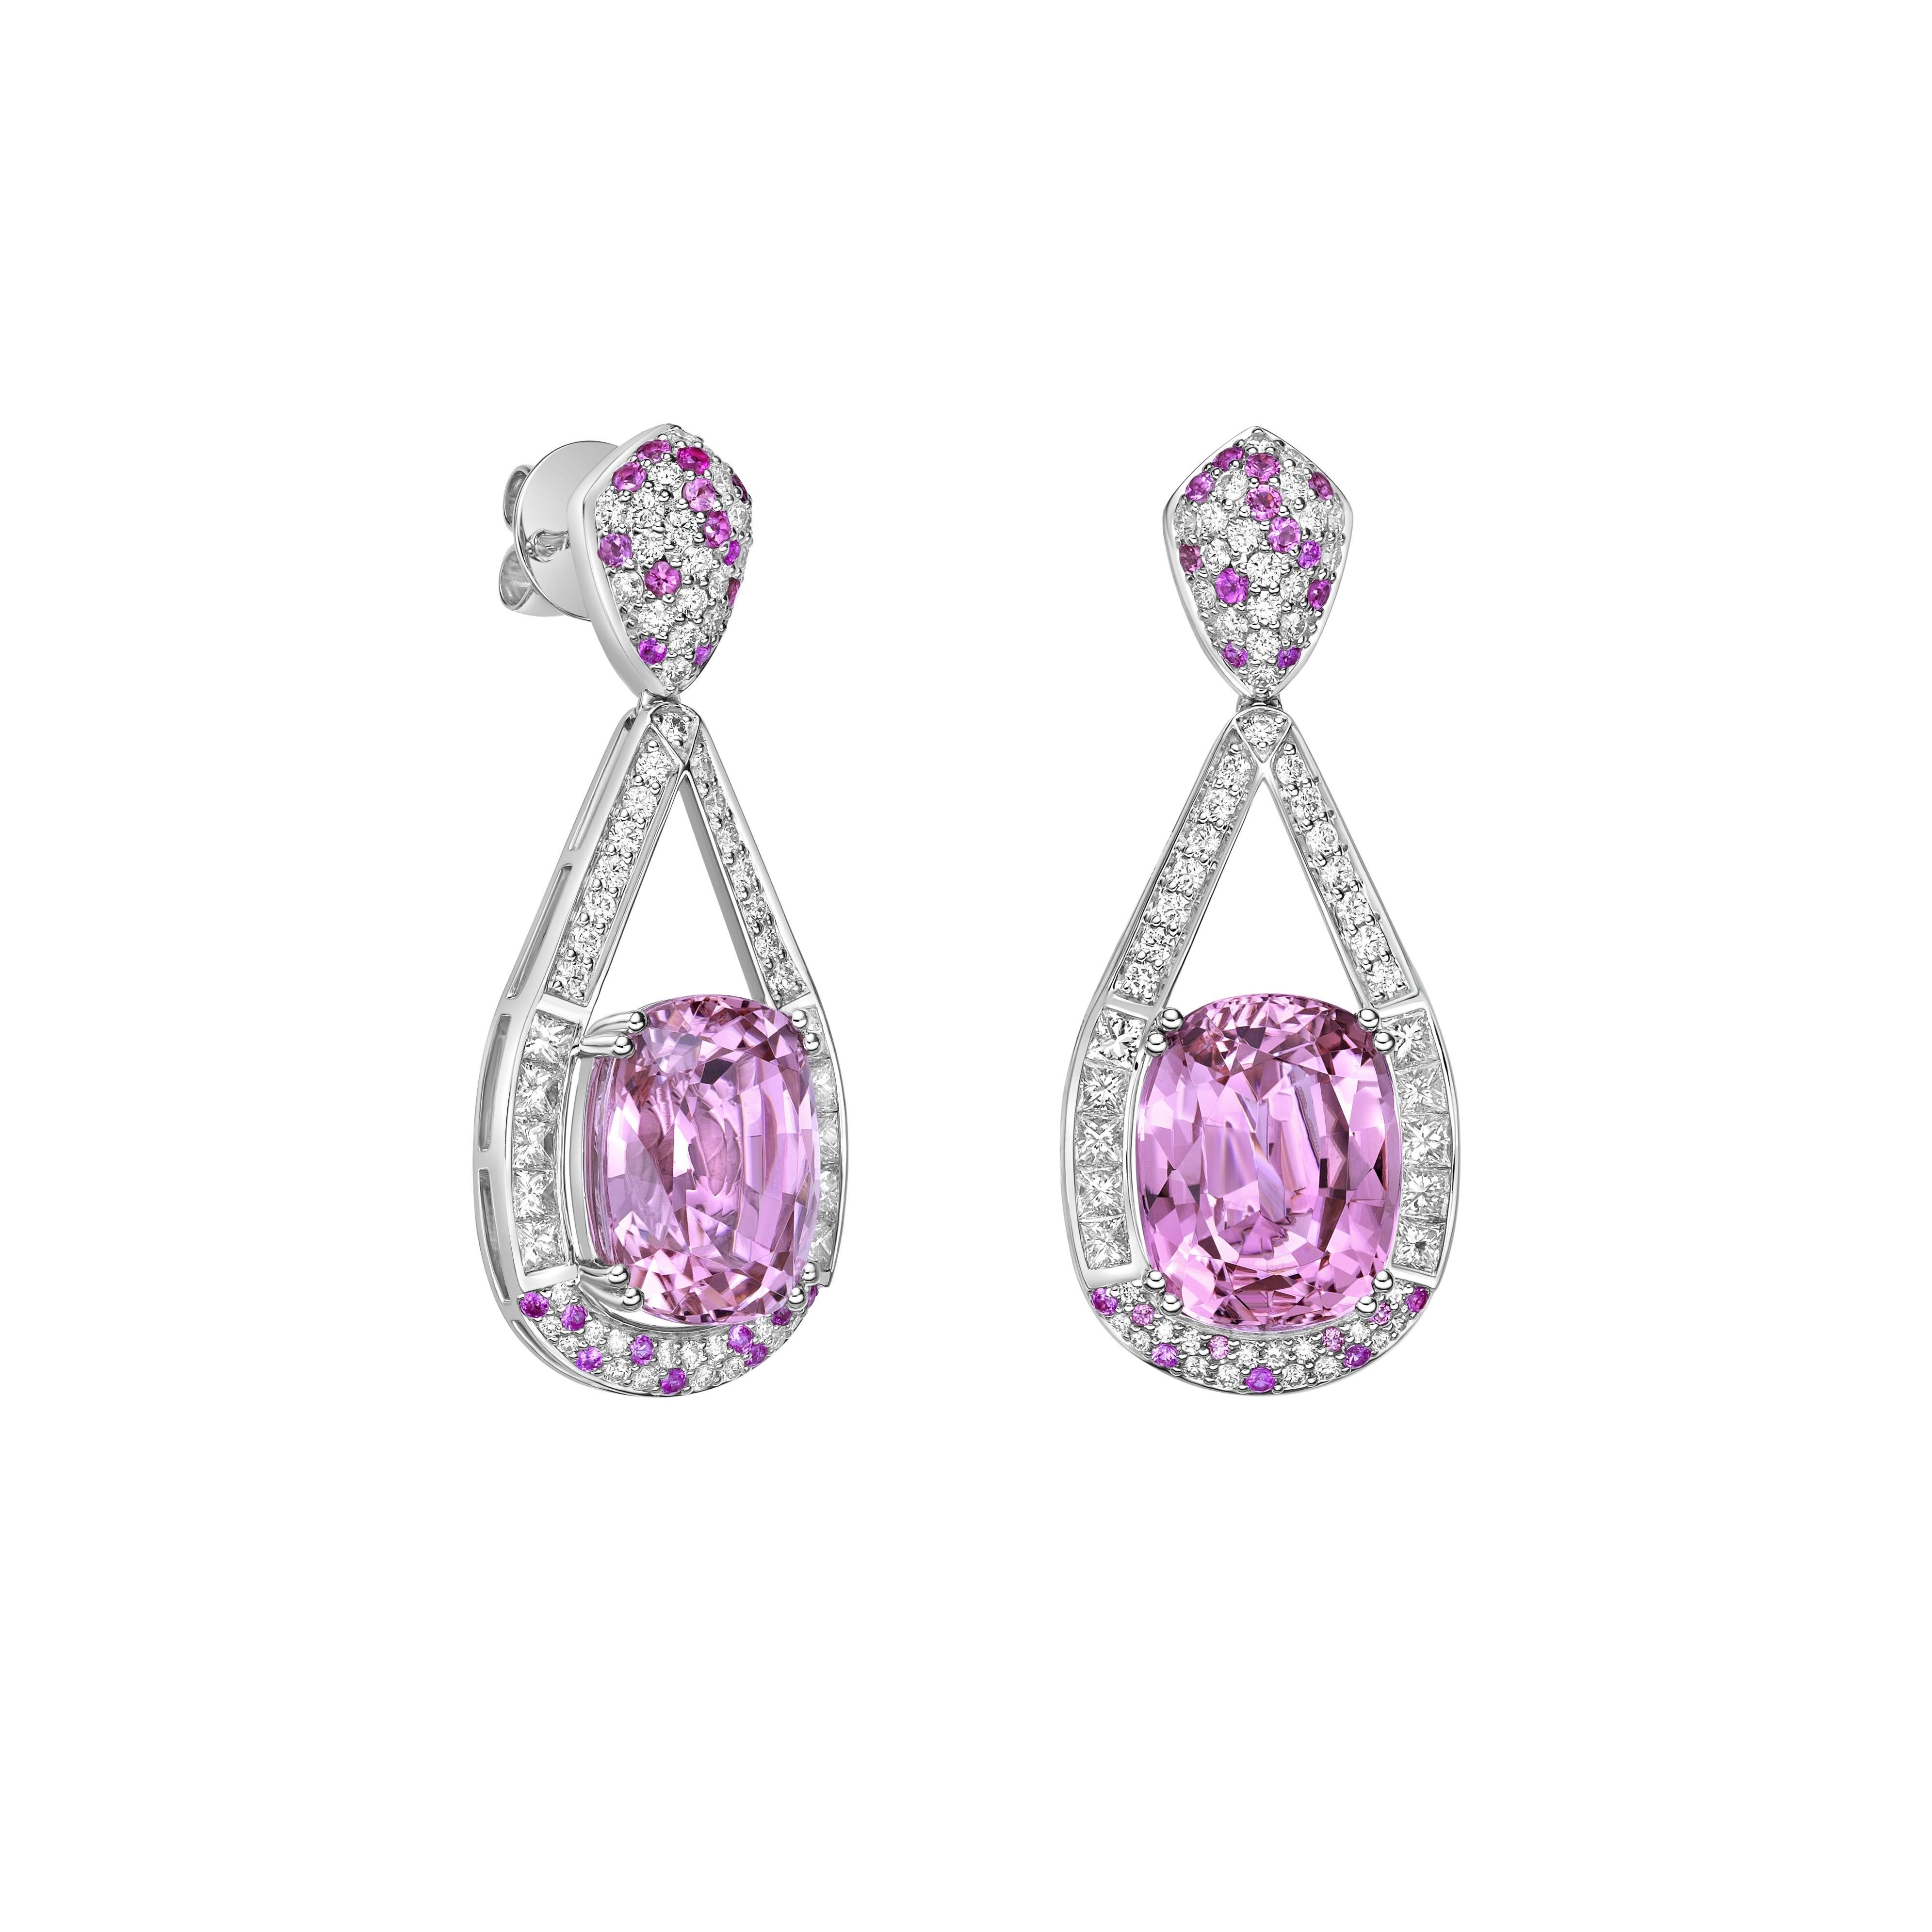 This collection features an array of Pink Tourmaline with a Pink hue that is as cool as it gets! Accented with diamonds these earrings are made in white gold and present a classic yet elegant look.

Pink Tourmaline Drop Earrings in 18 Karat White